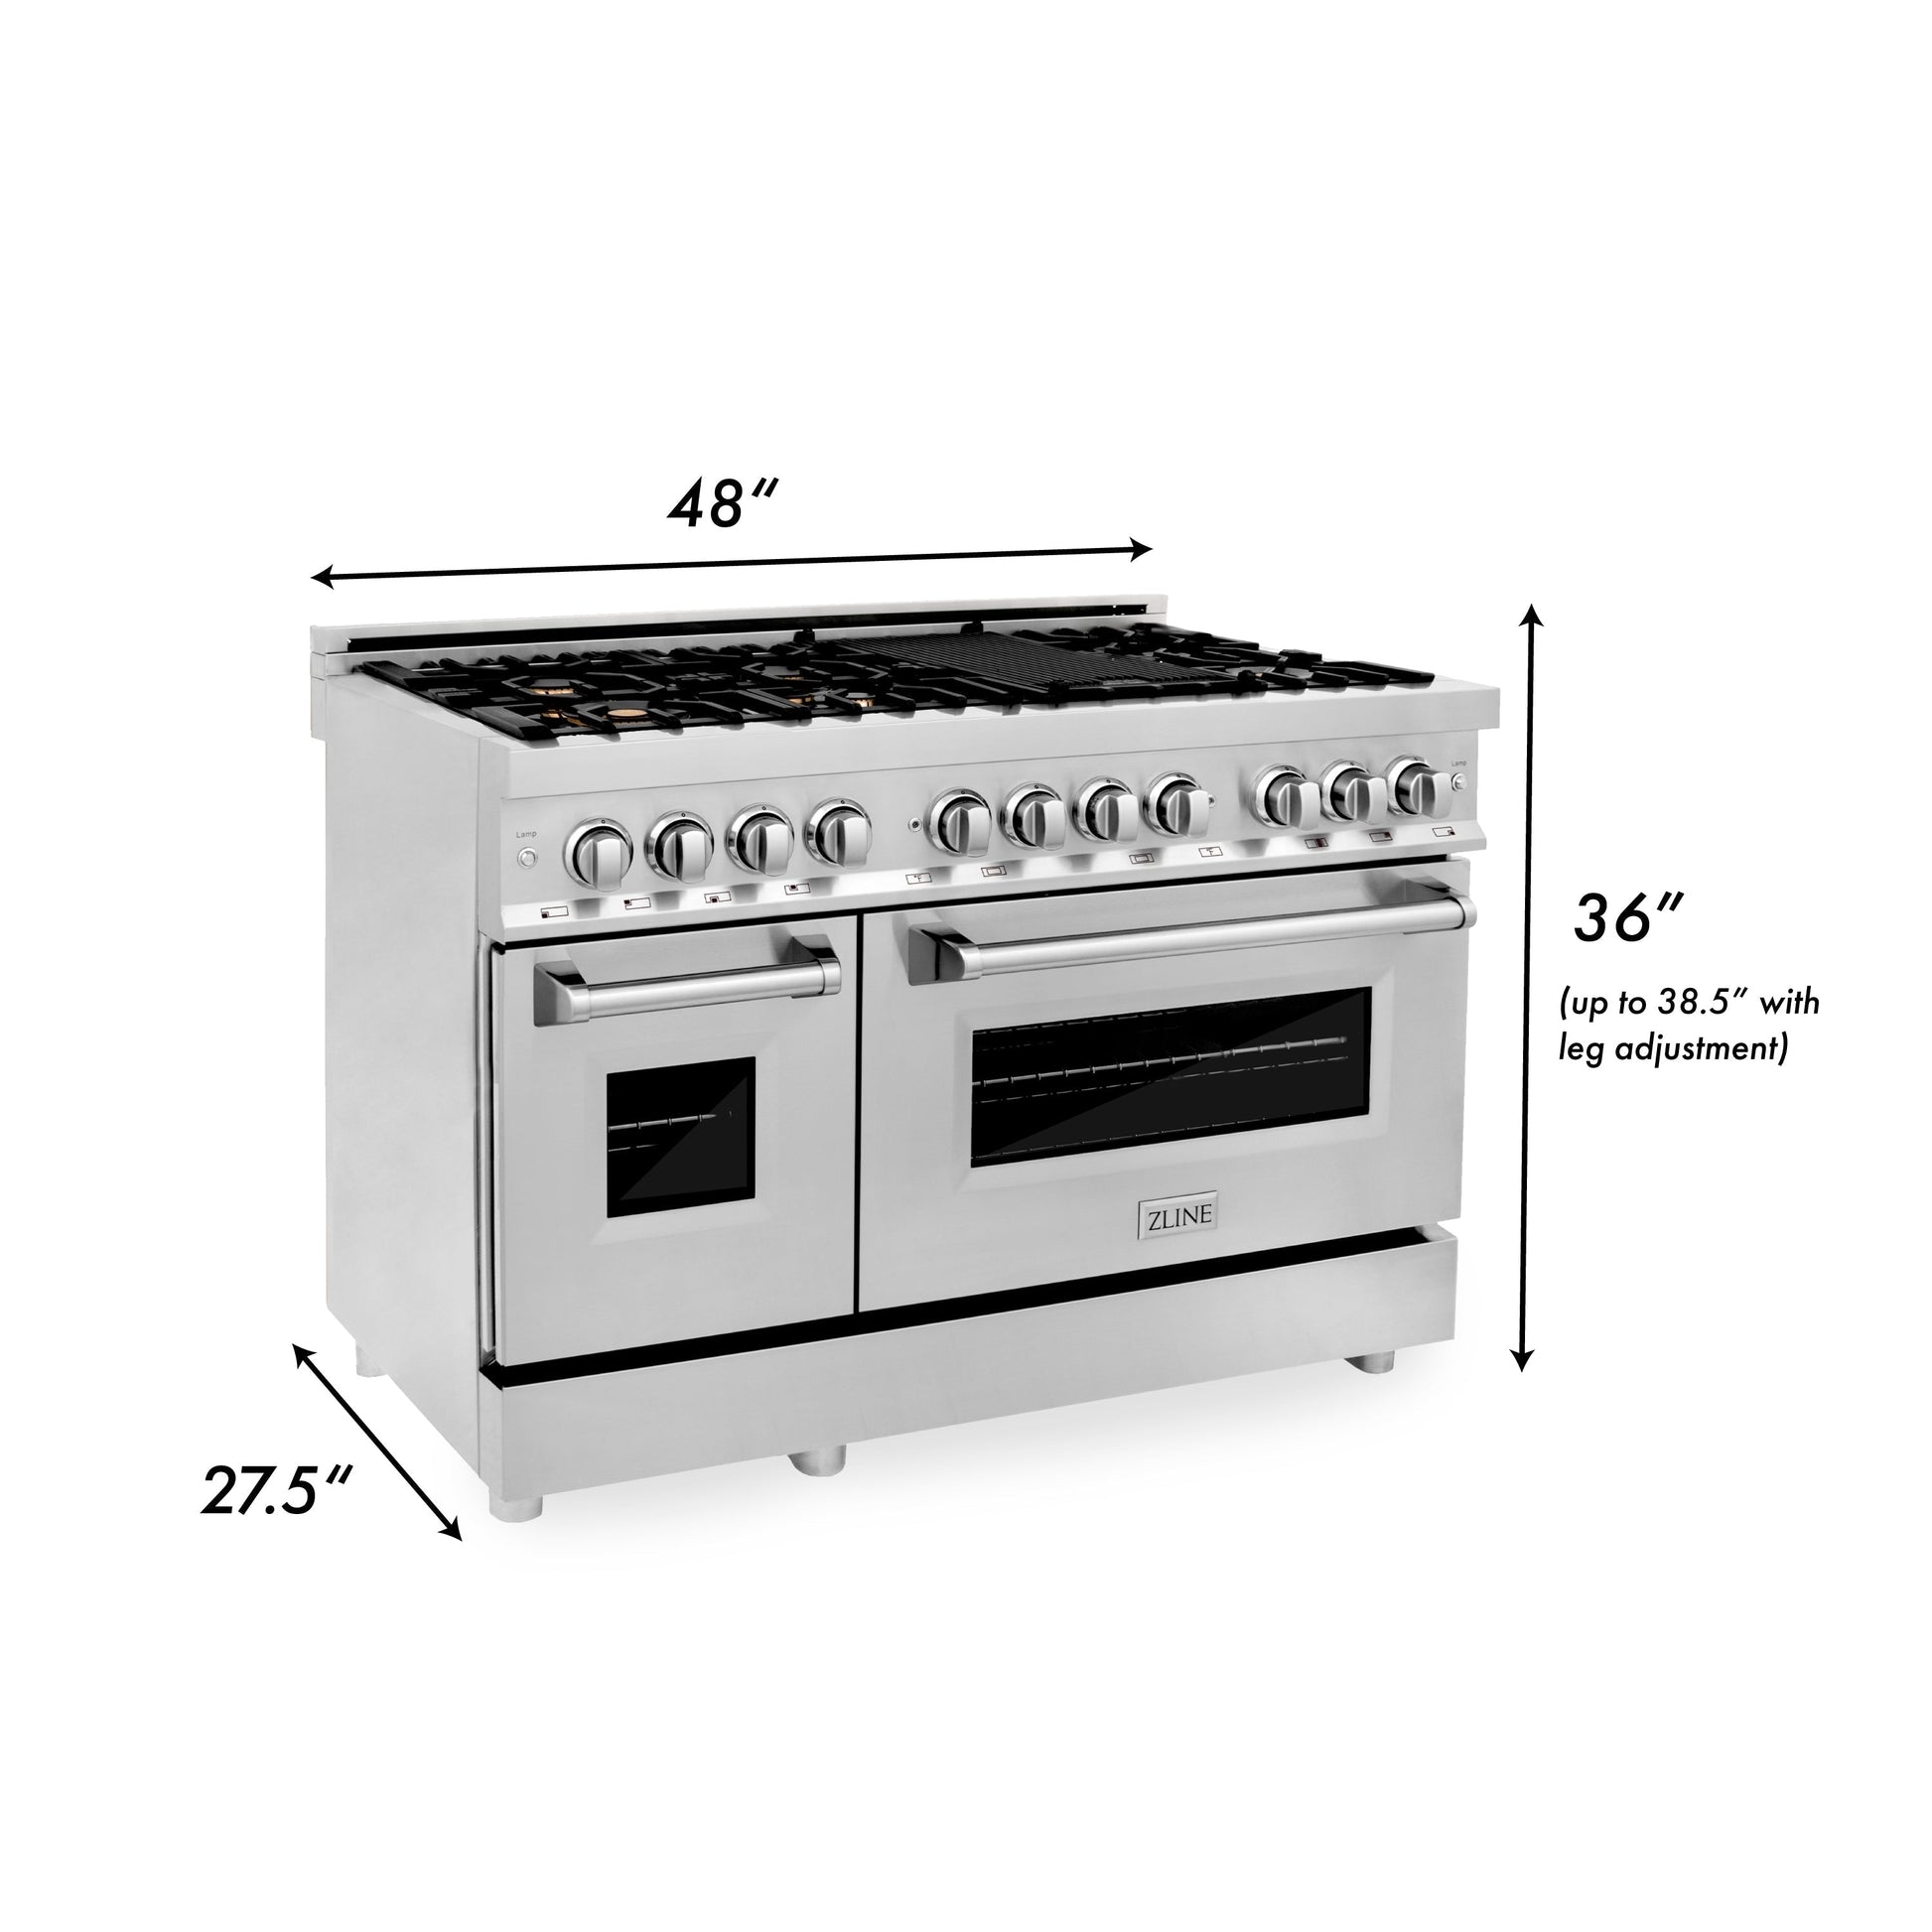 ZLINE 48" Dual Fuel Range with Electric Oven and Gas Cooktop with Griddle - Stainless Steel with Brass Burners